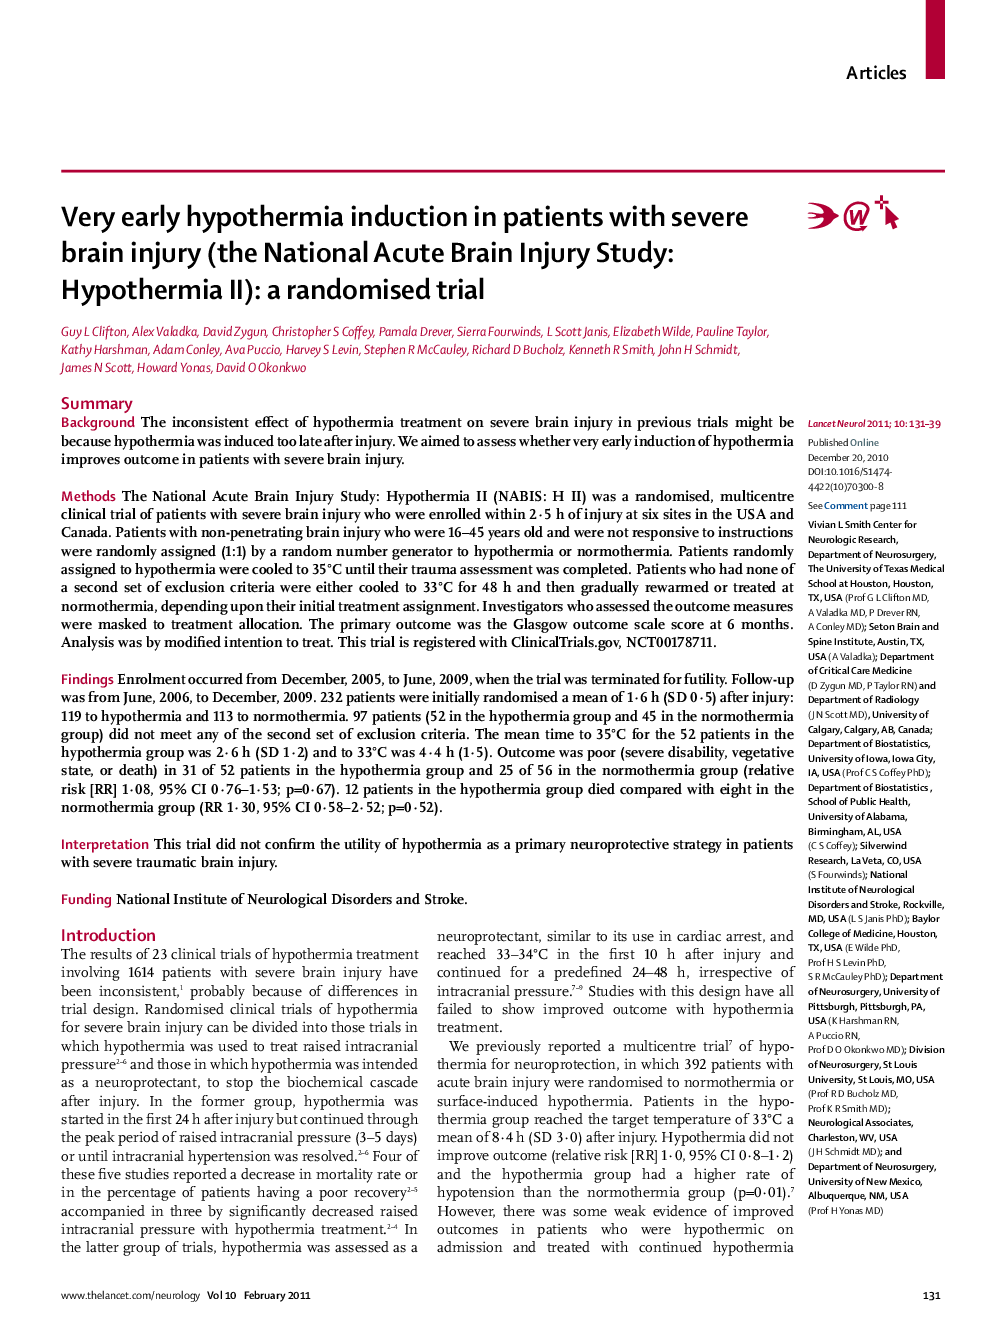 Very early hypothermia induction in patients with severe brain injury (the National Acute Brain Injury Study: Hypothermia II): a randomised trial